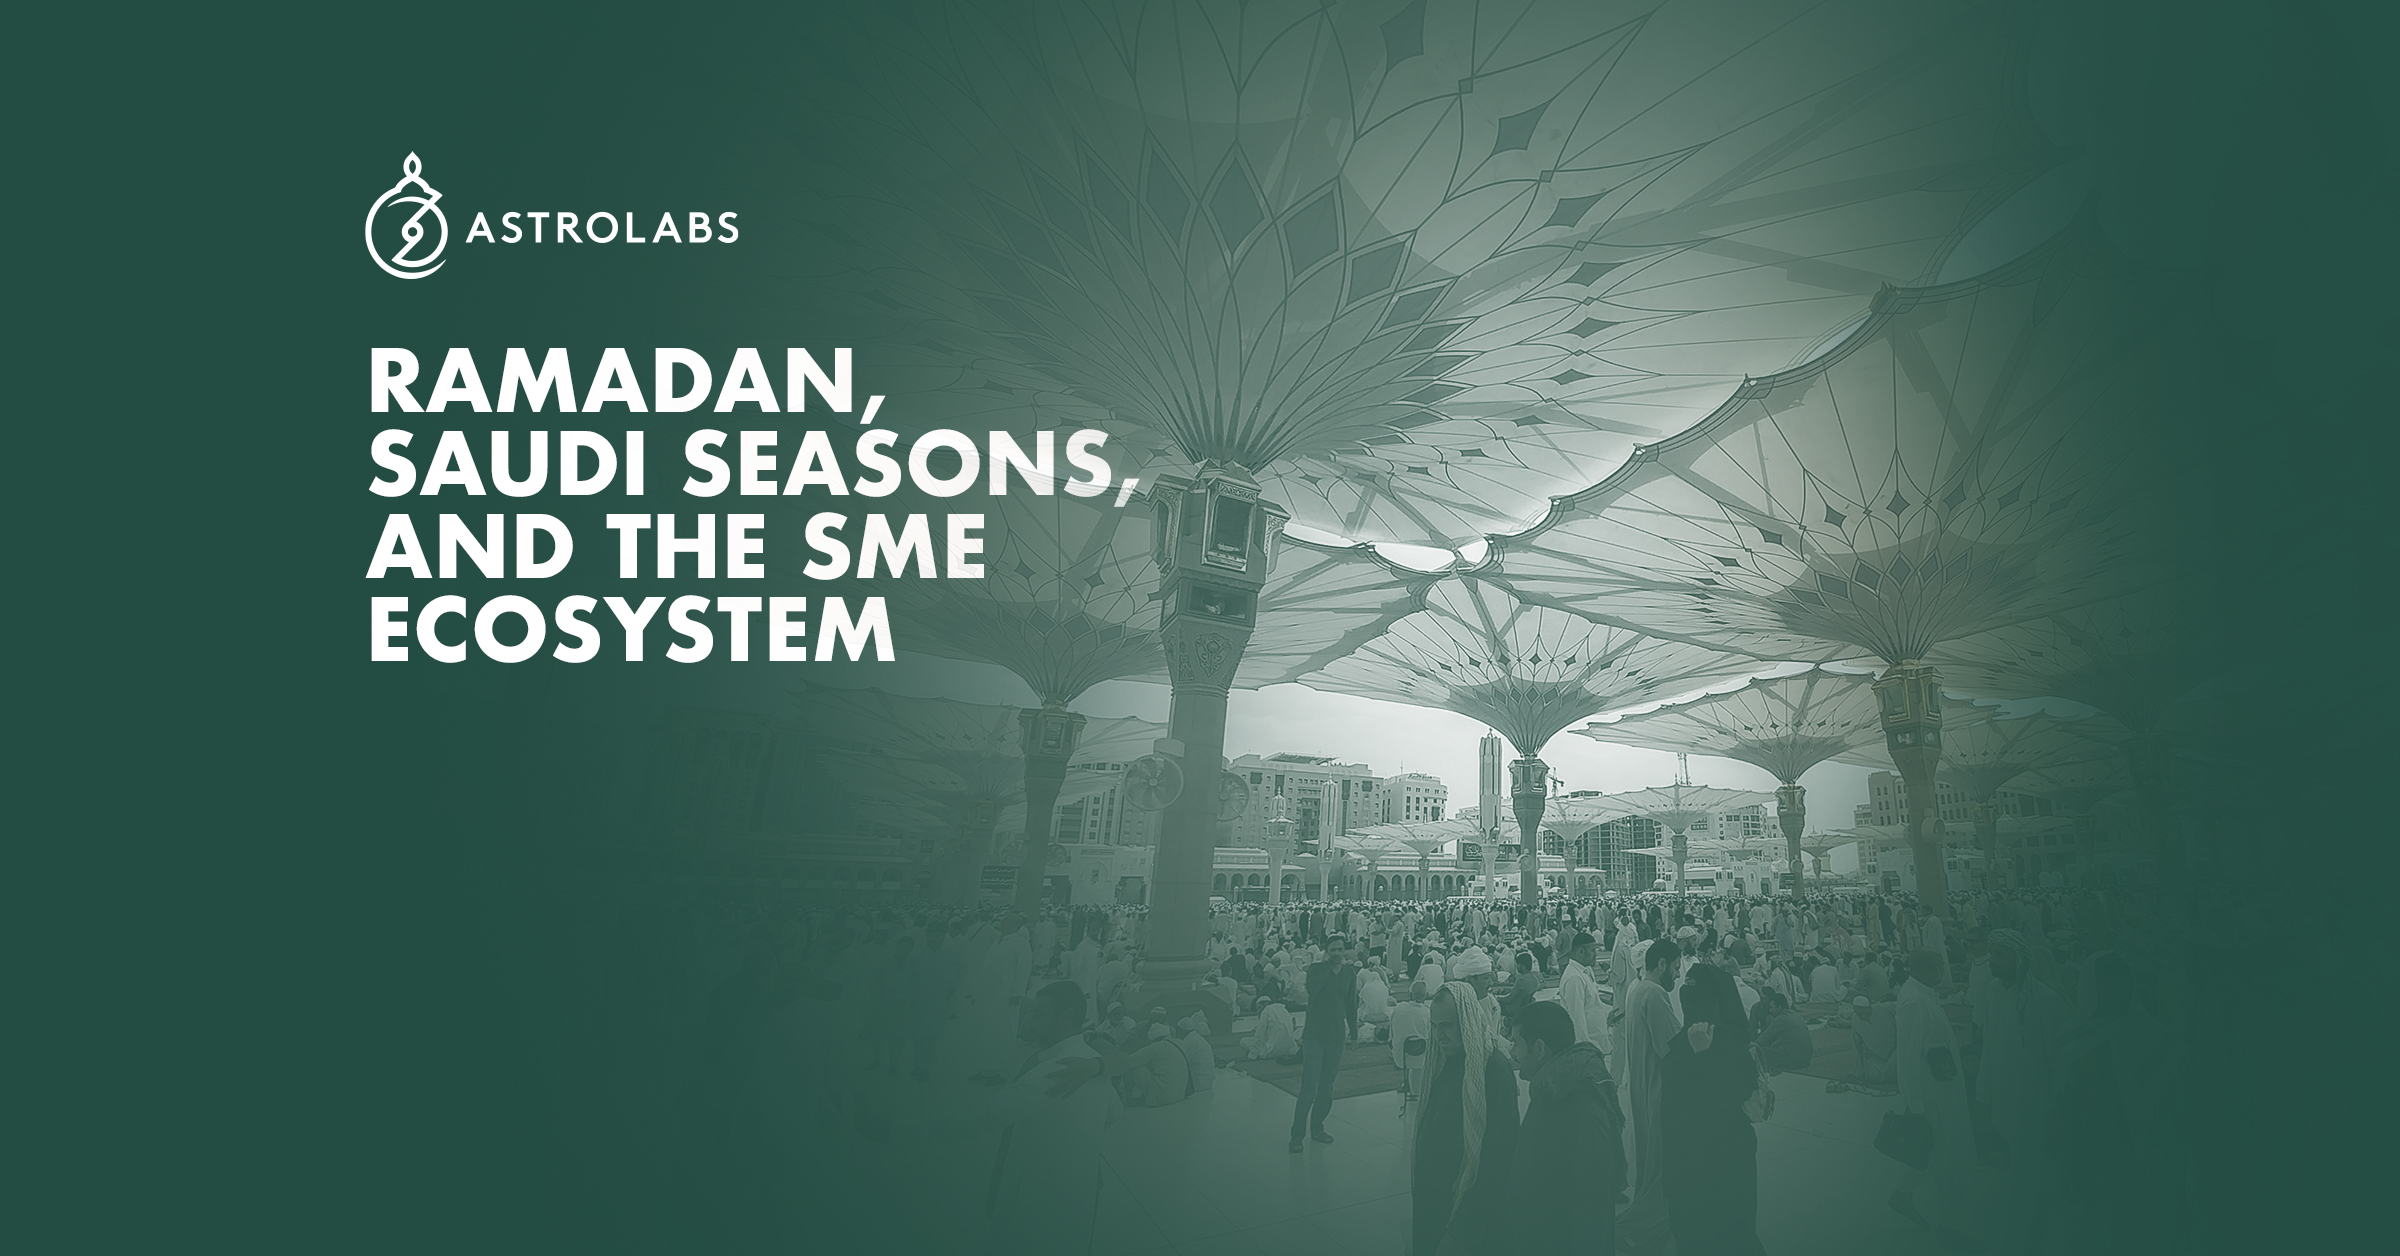 Ramadan and festives seasons opportunities for SME ecosystem